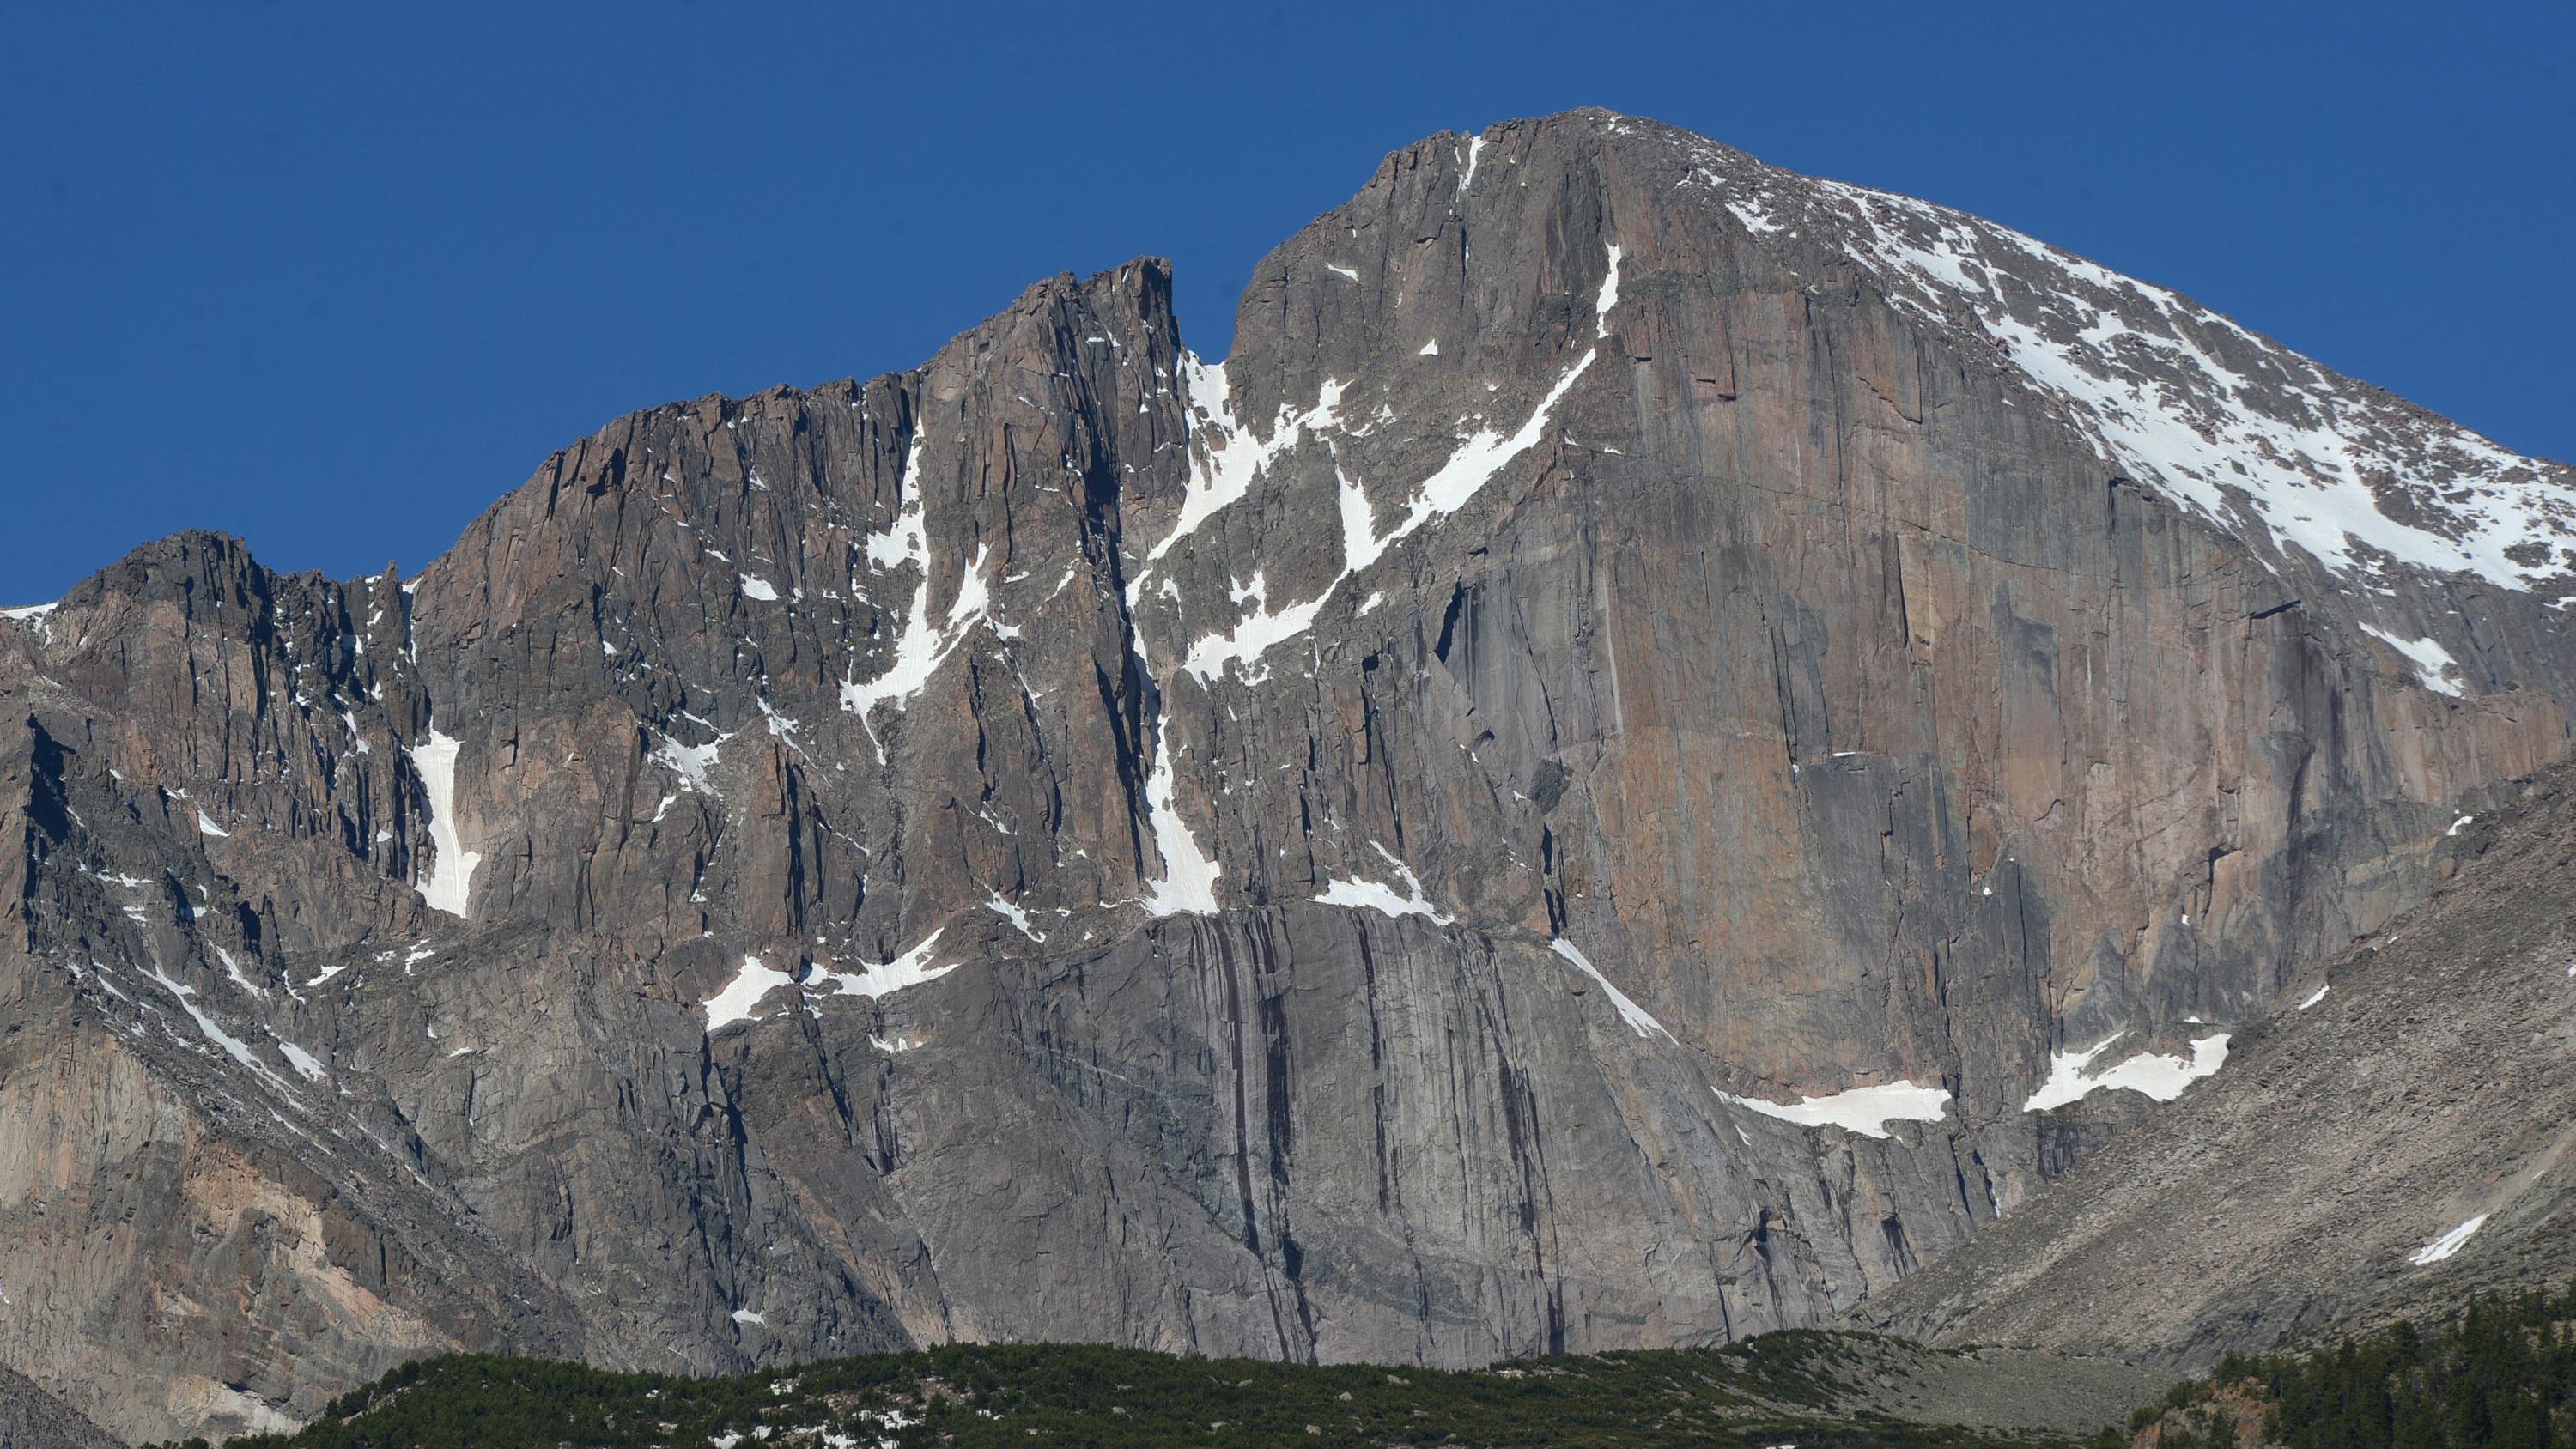 Here’s how to climb 14,259-foot Longs Peak safely.